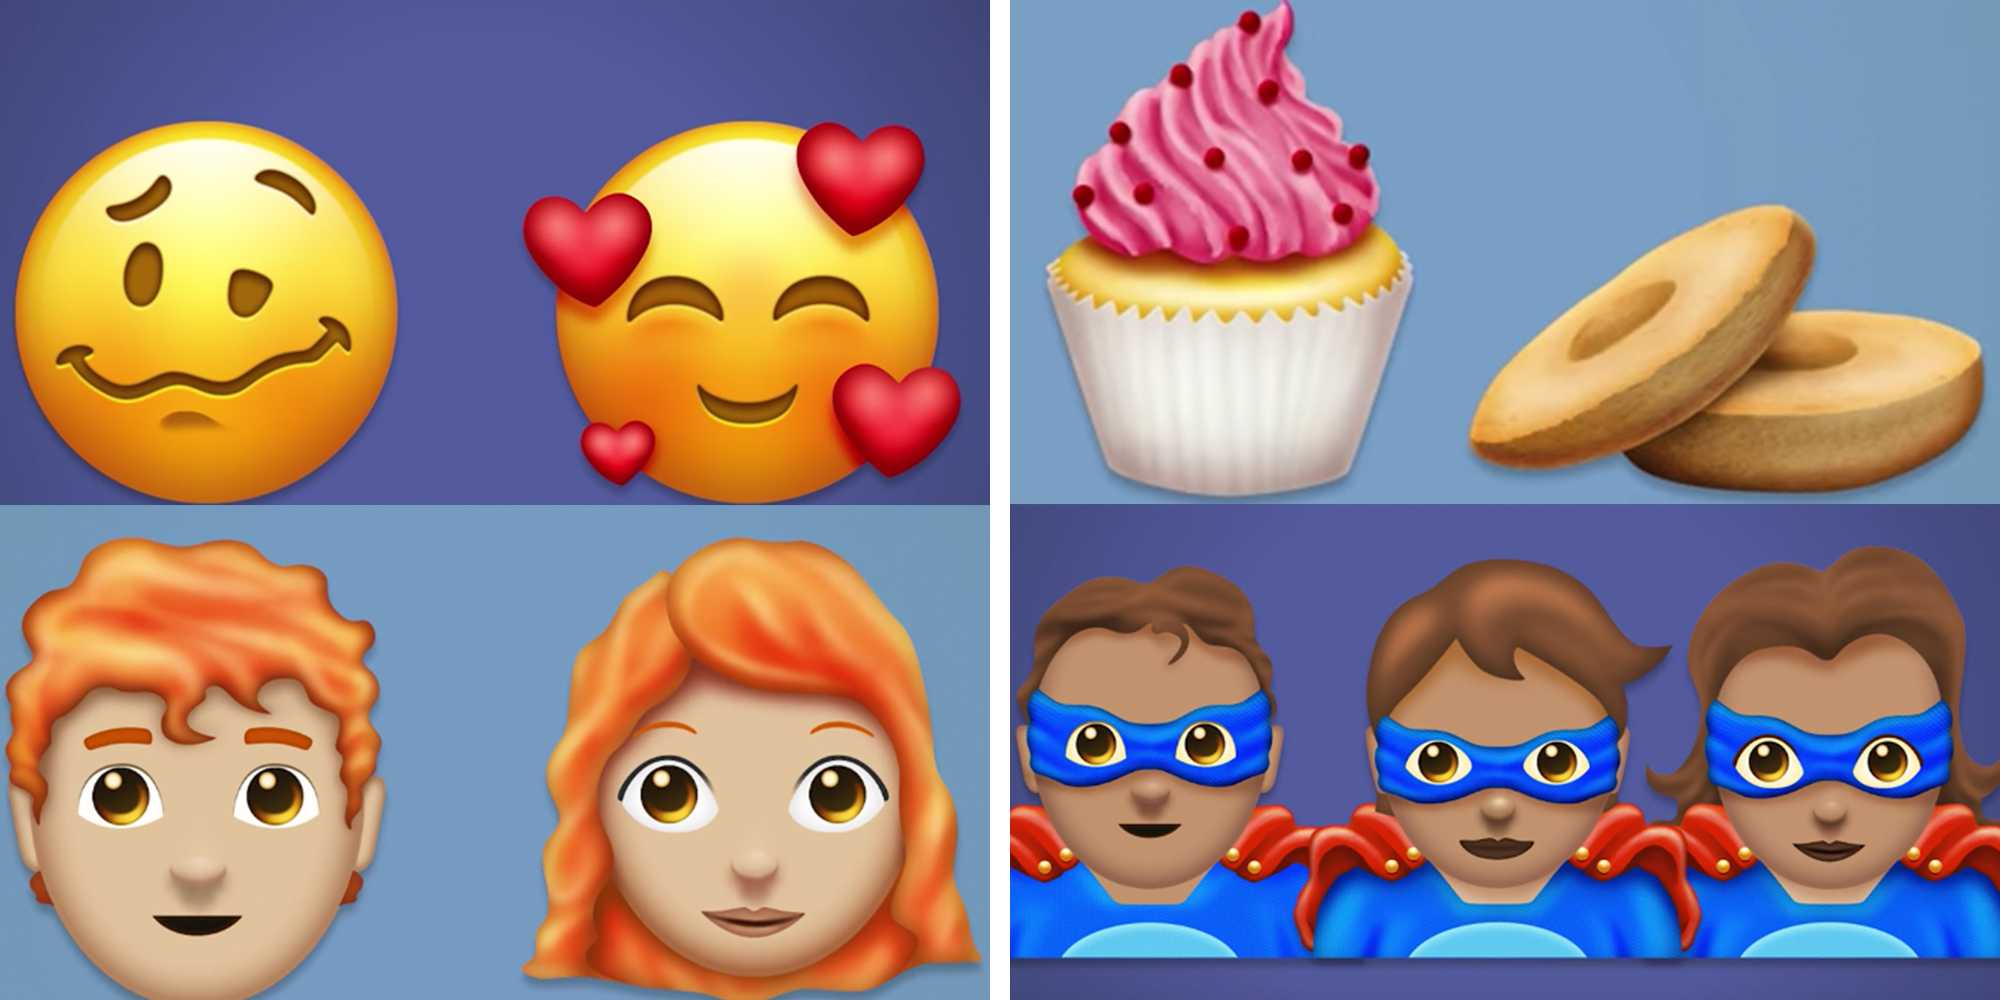 Over 150 new emojis are coming this year